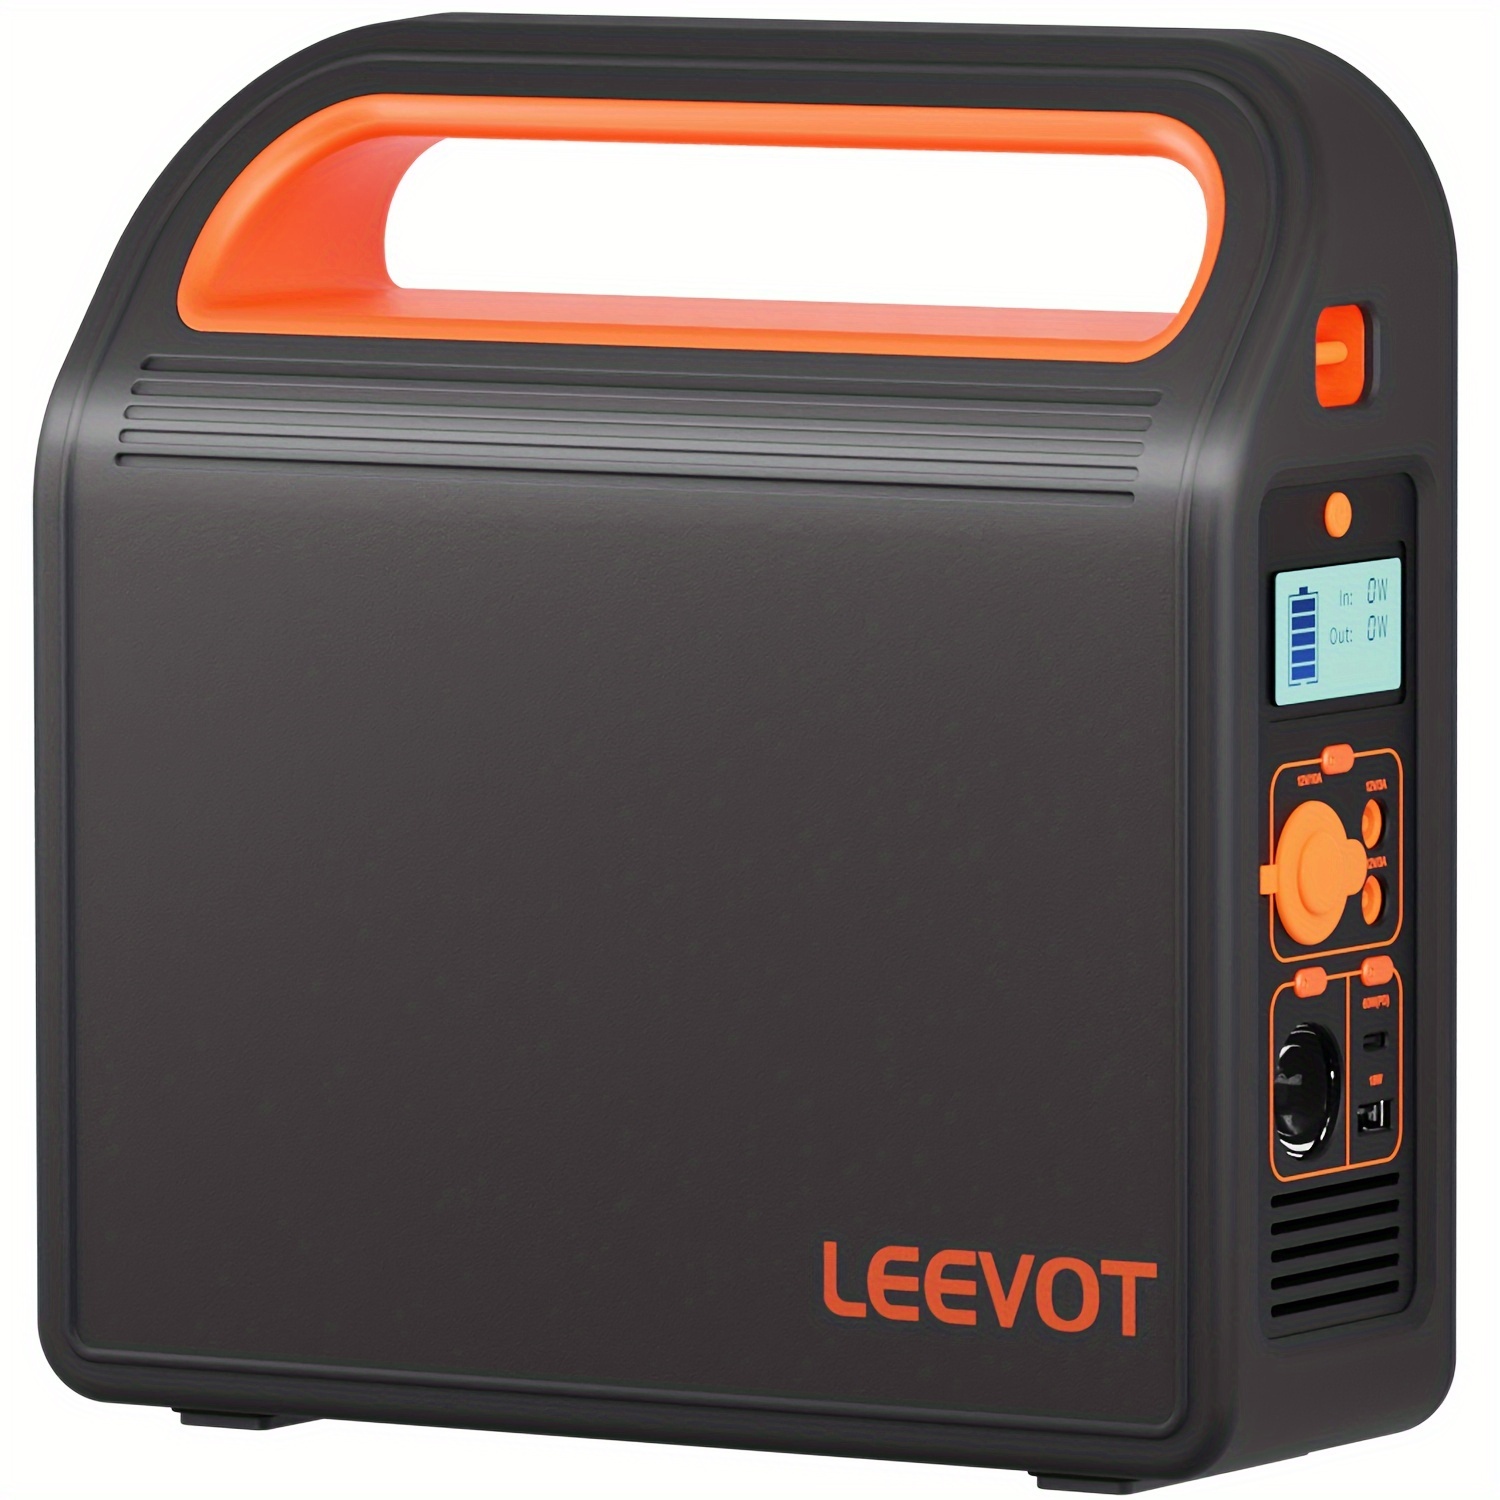 

Portable Power Station 300w, Leevot 288wh Solar Generator With 60w Usb-c Pd Output, 110v Pure Sine Wave Ac Outlet Backup Lithium Battery Pack For Outdoors Camping Travel Hunting Home Blackout